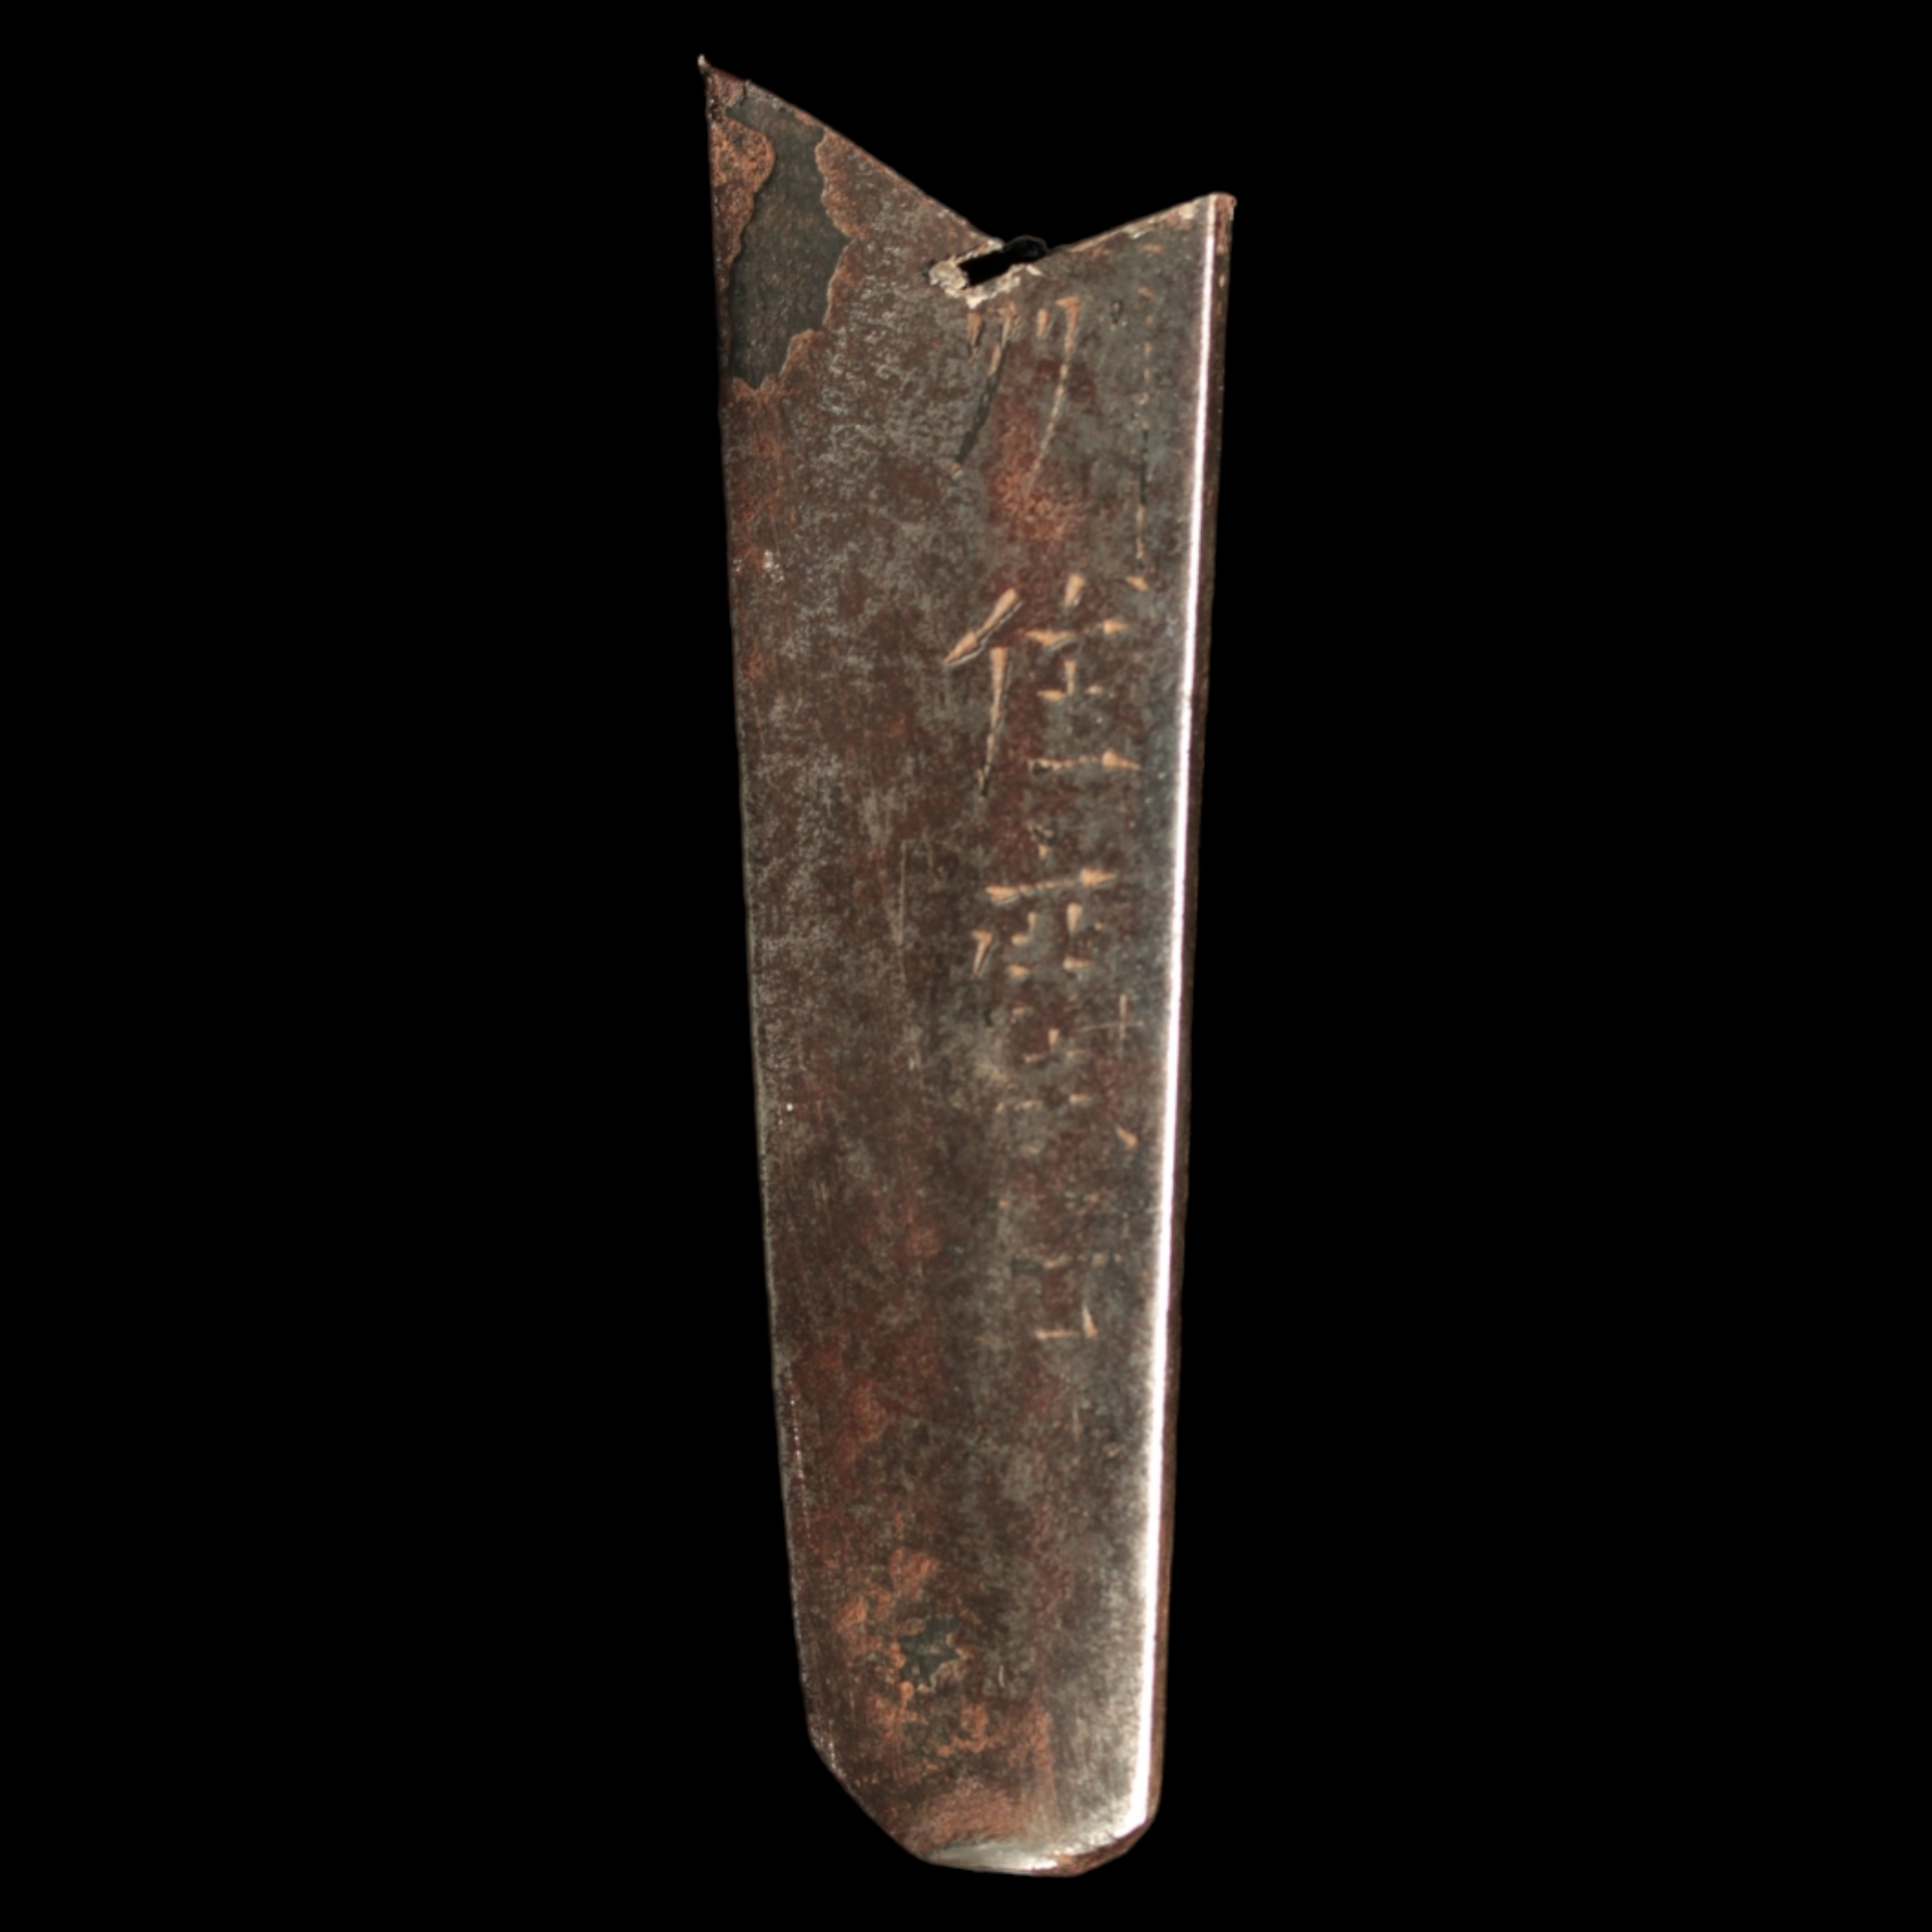 Sword Fragment with Engraved Signature (2.75 inches) - c. 1800's CE - Edo or Meiji Era - 2/22/23 Auction